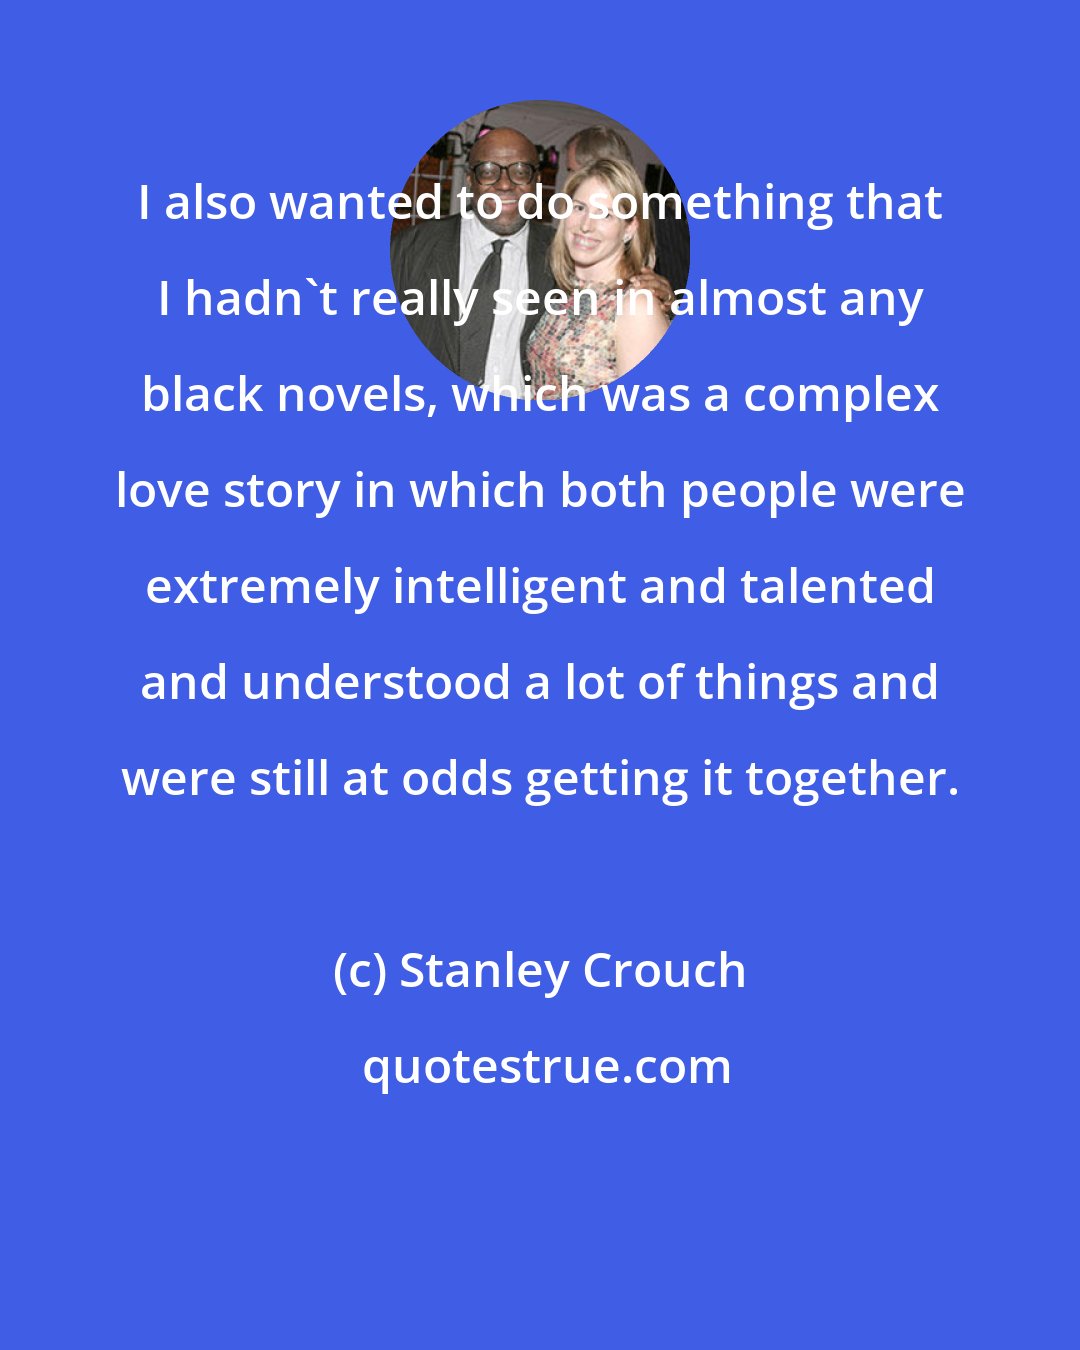 Stanley Crouch: I also wanted to do something that I hadn't really seen in almost any black novels, which was a complex love story in which both people were extremely intelligent and talented and understood a lot of things and were still at odds getting it together.